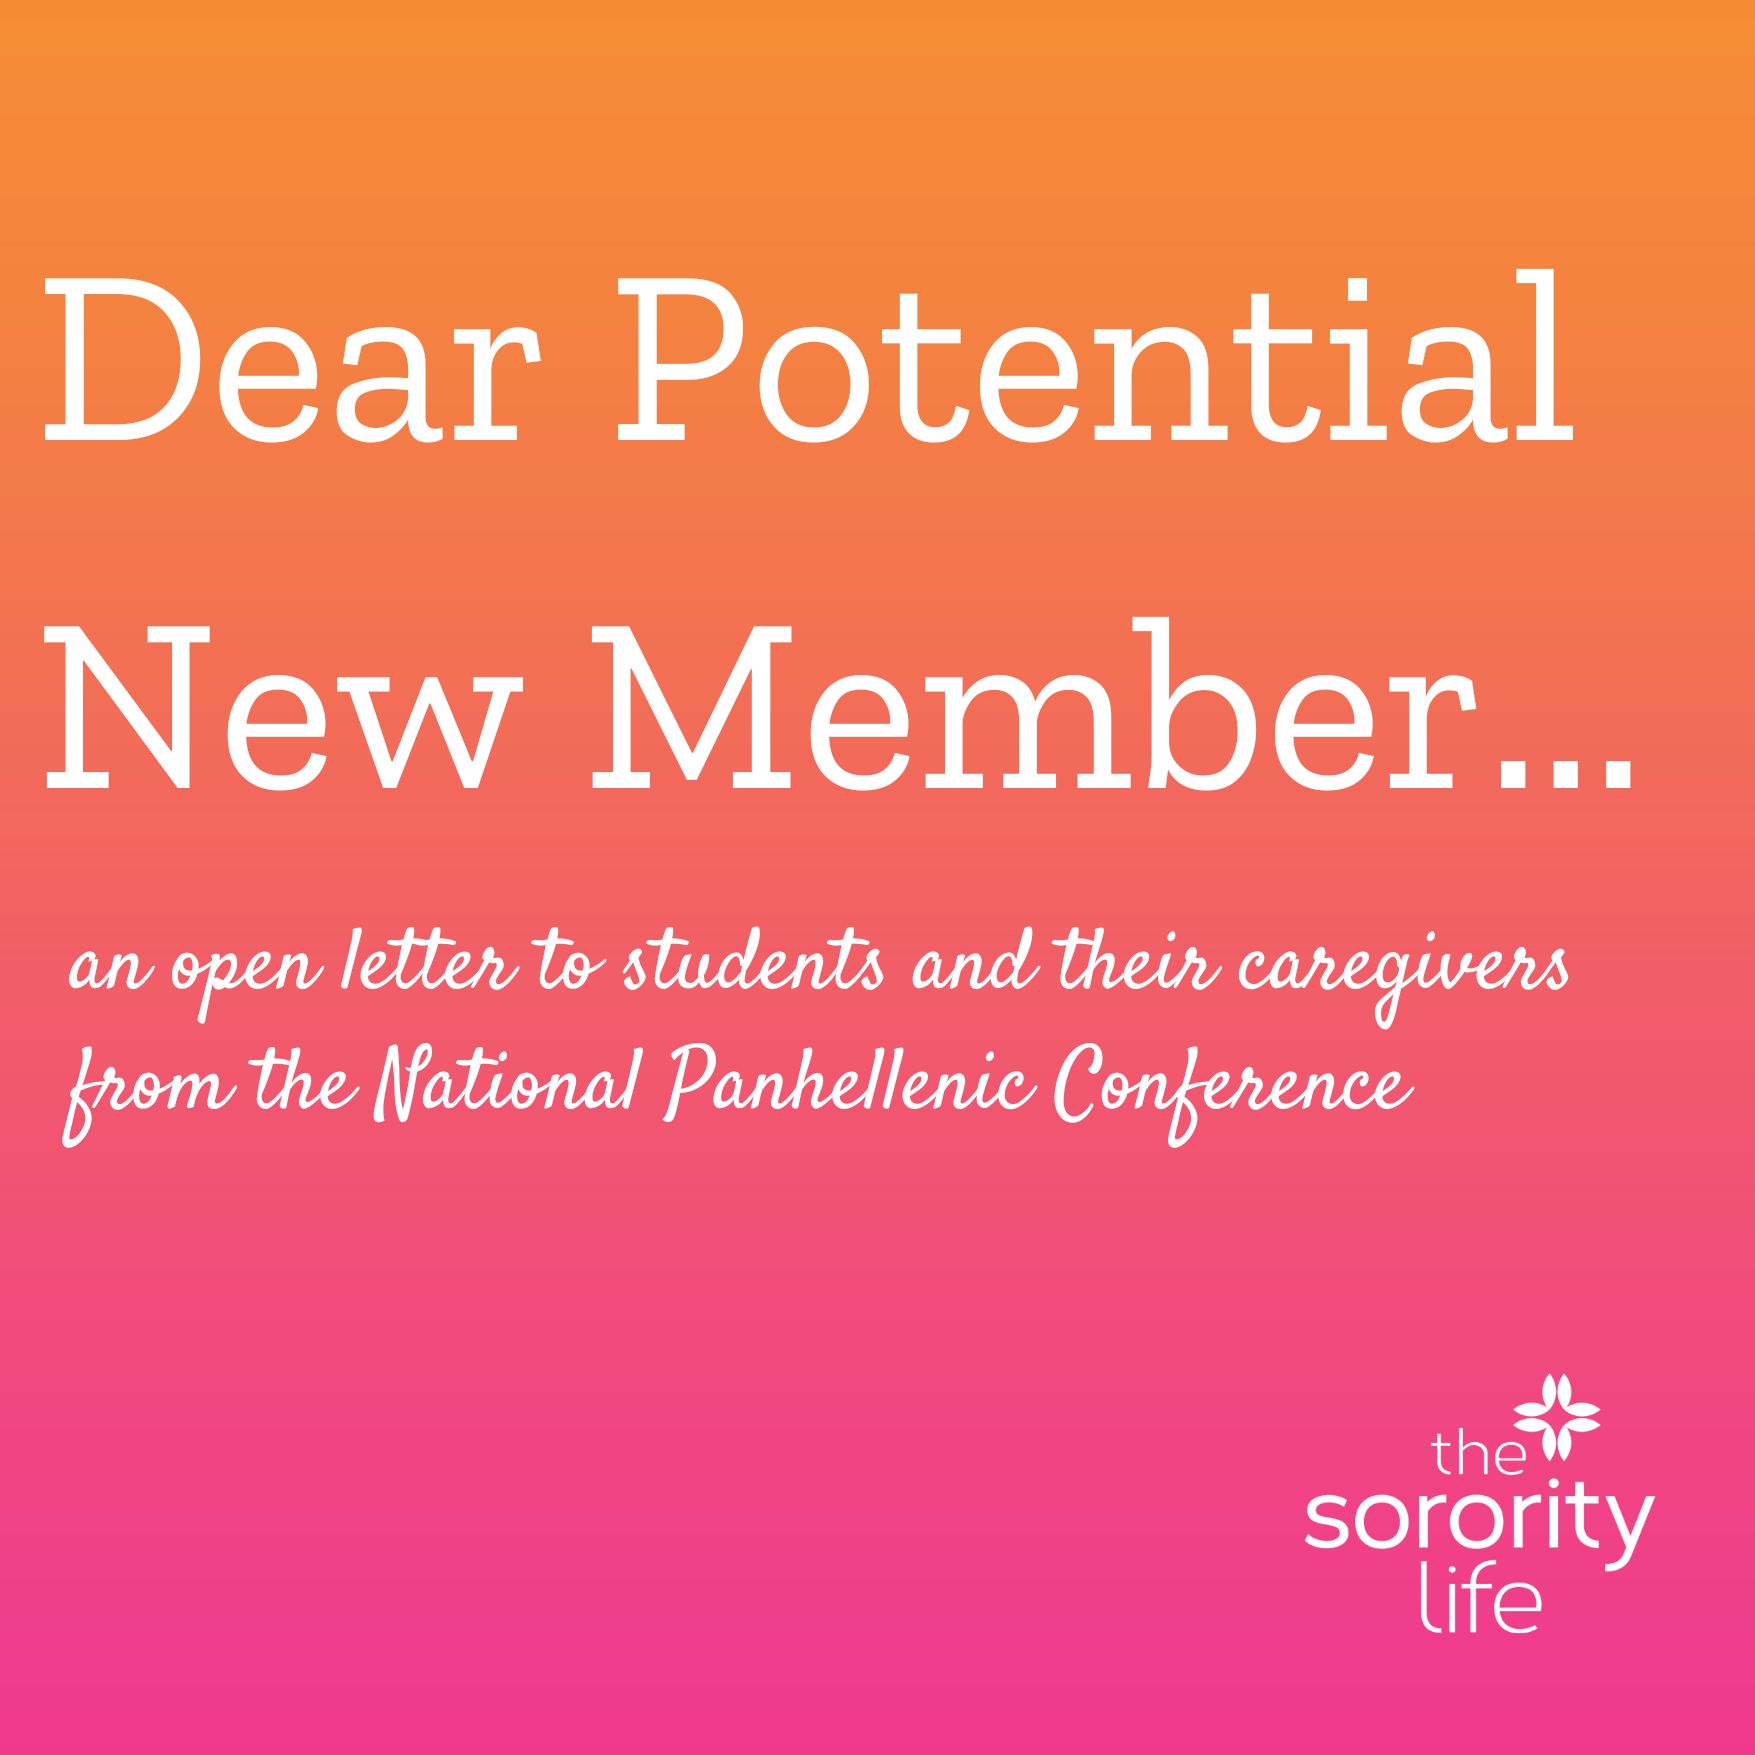 An Open Letter to Prospective New Members from the National Panhellenic Conference